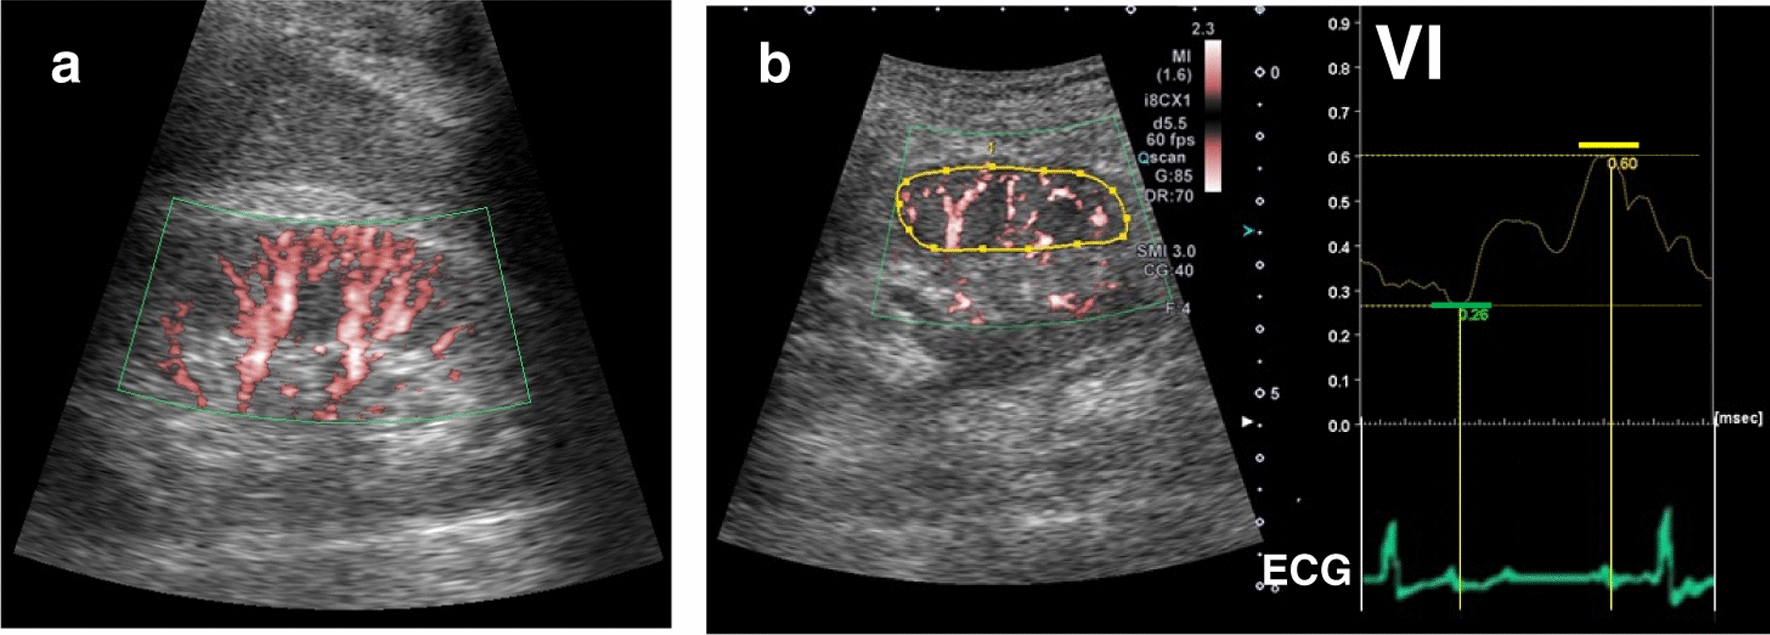 Evaluation of renal circulation in heart failure using superb microvascular imaging, a microvascular flow imaging system